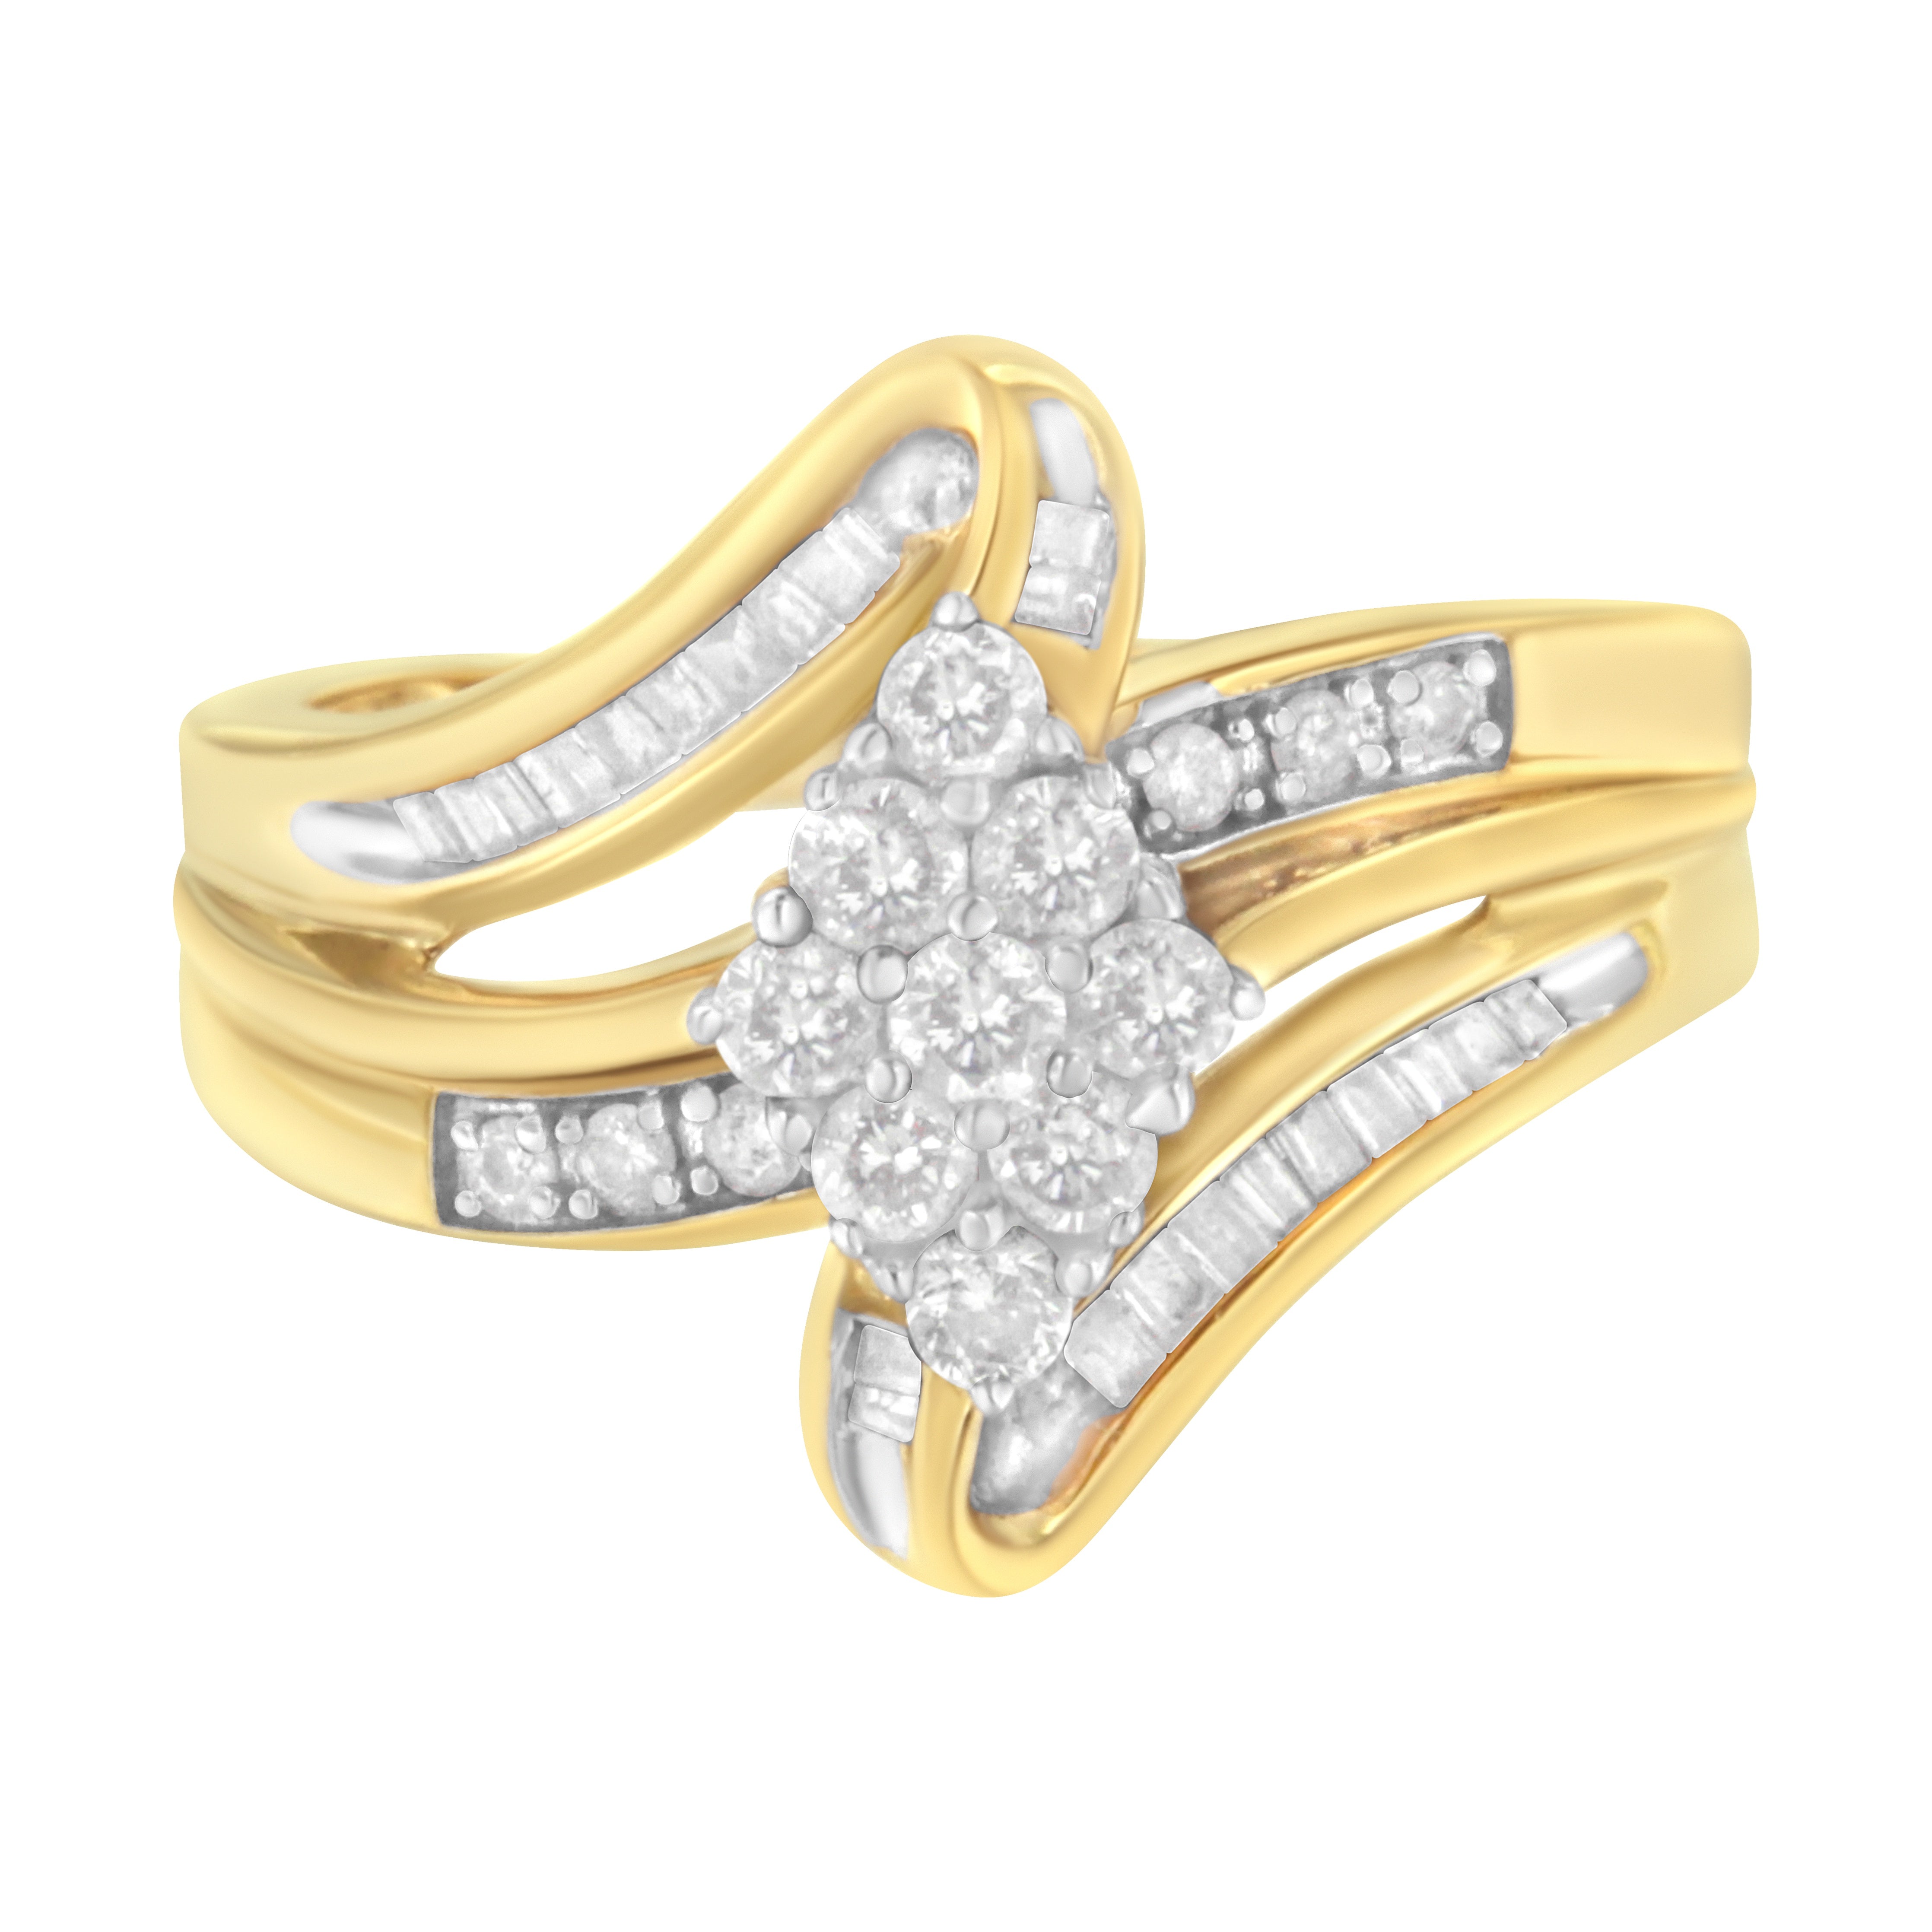 D Ladies Cocktail Ring in Dandeli at best price by Panna Diamond World Llp  - Justdial